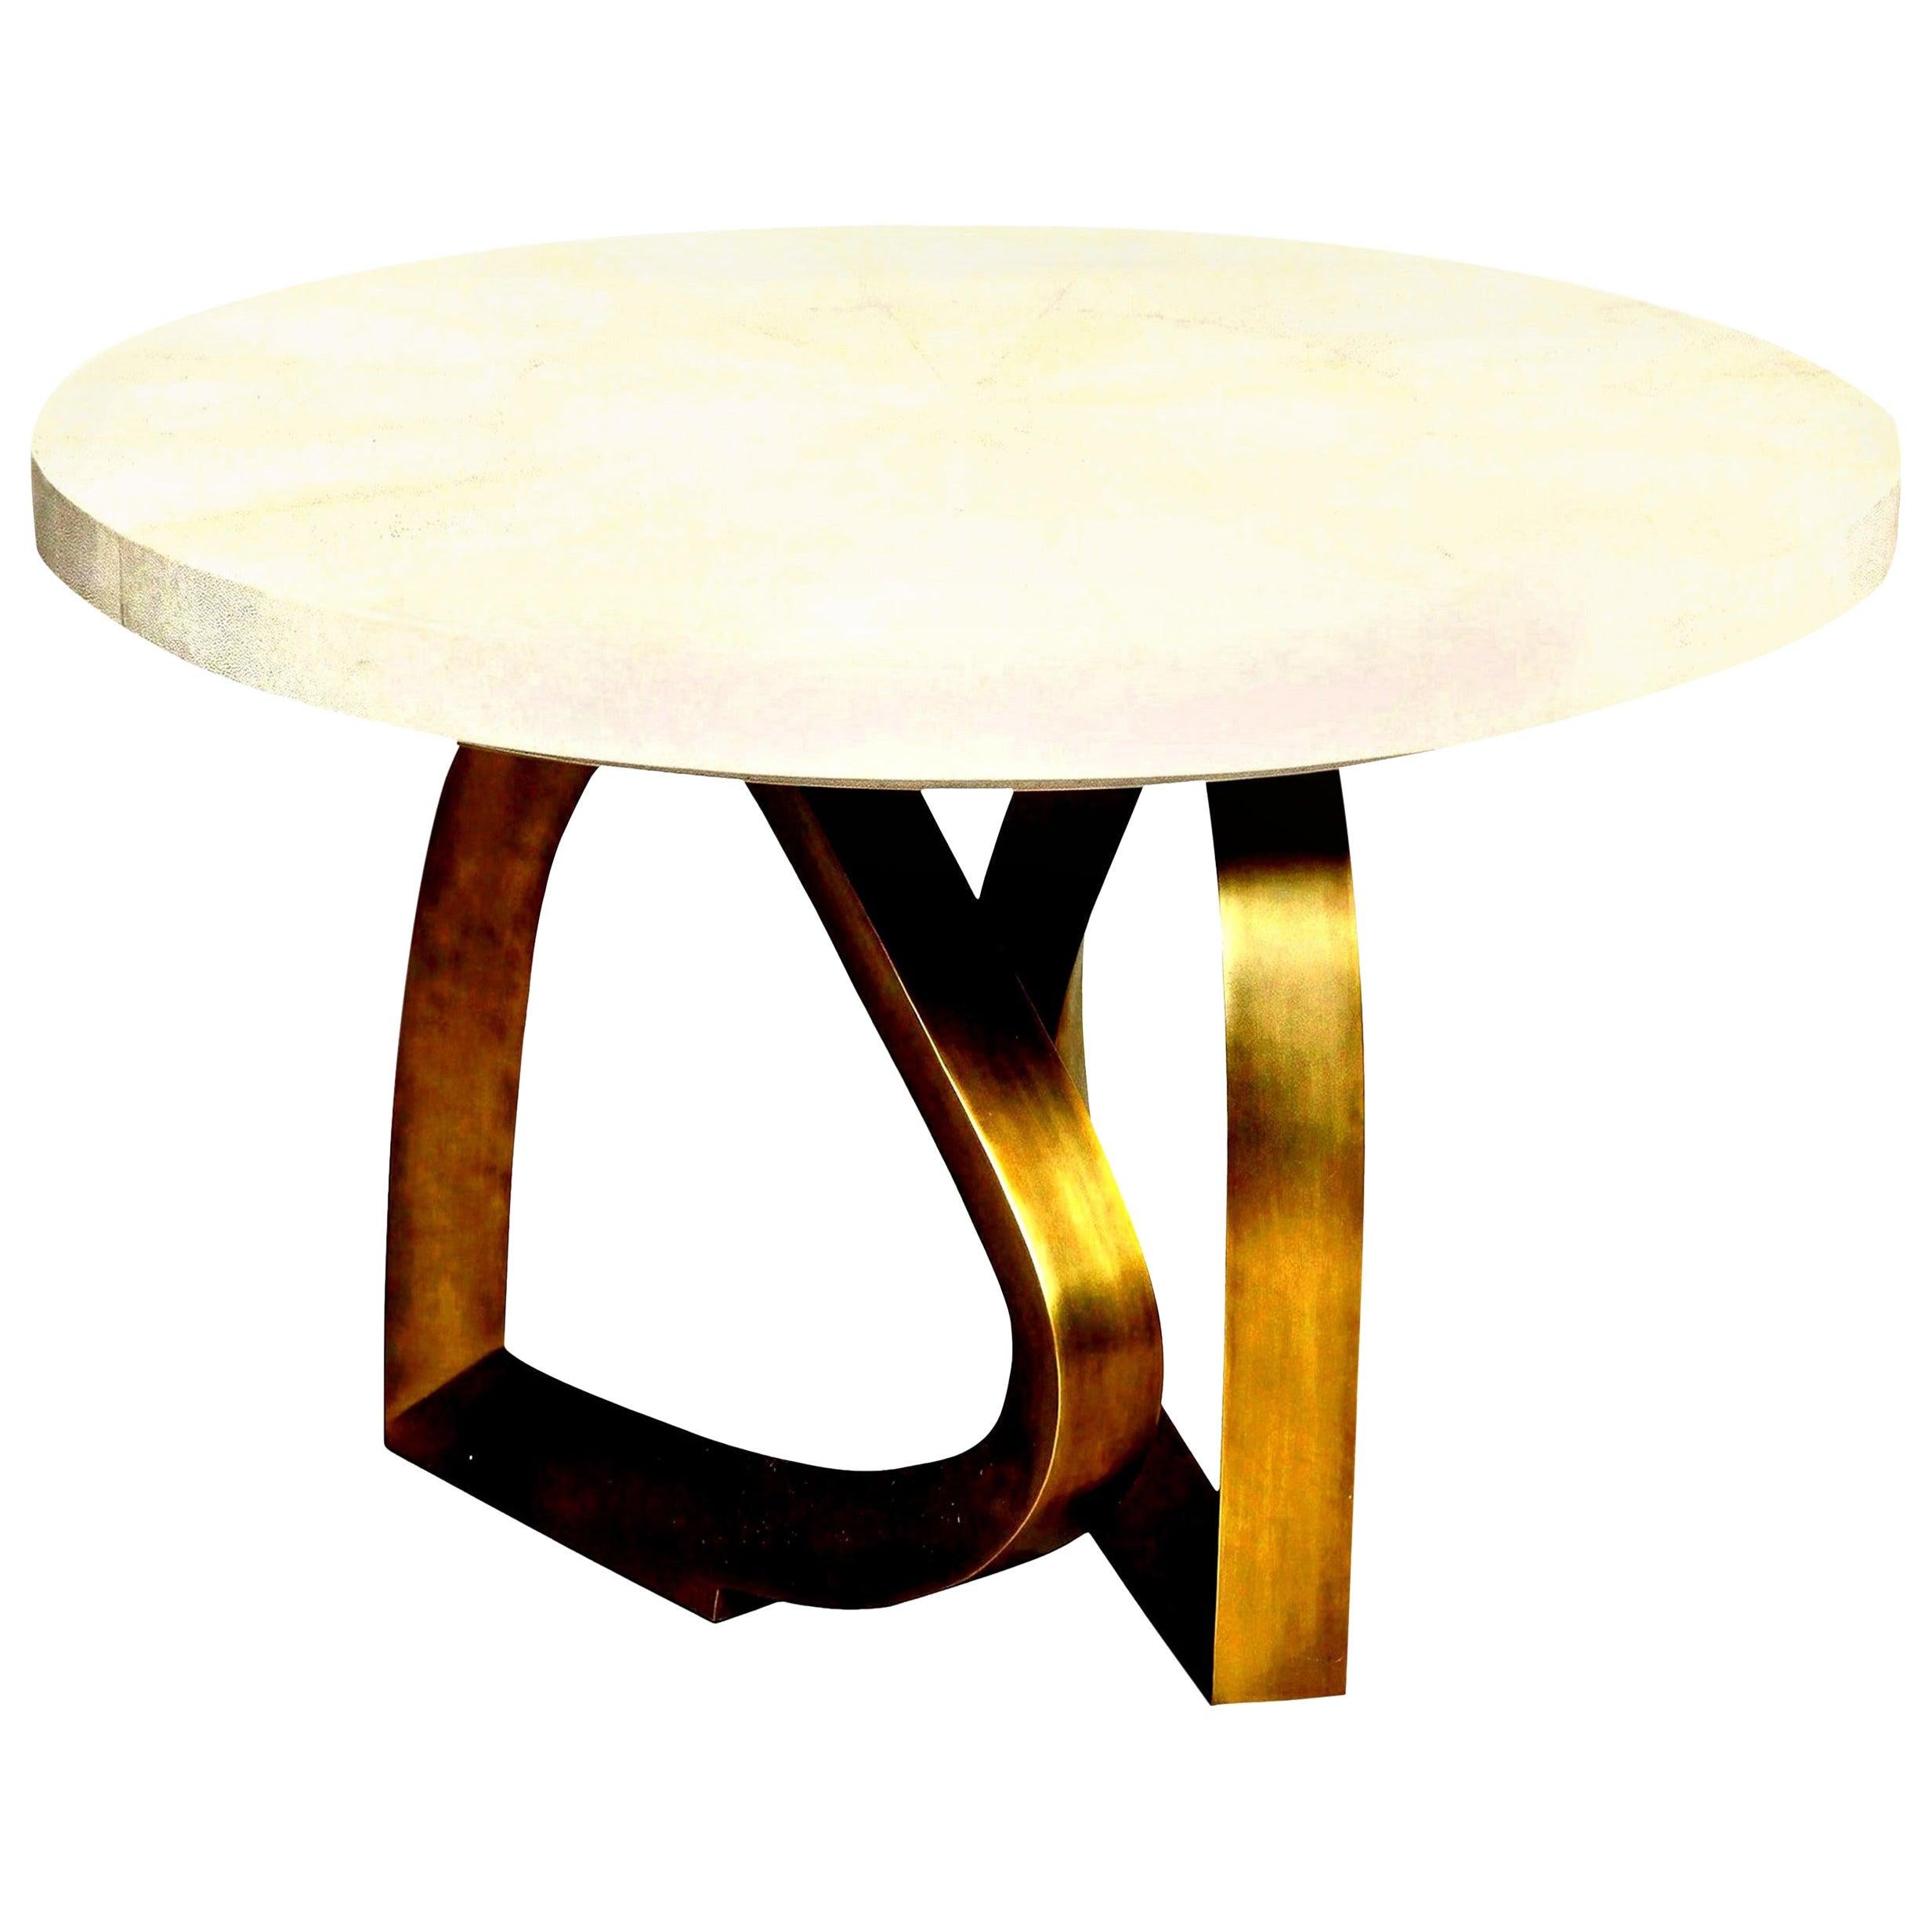 Decorative shagreen cream dining table with an organic shaped brass base, designed in France. Breakfast table/ dining room table.
We have the shagreen table in stock.
The top is beautifully made of shagreen. The organic shaped brass base looks